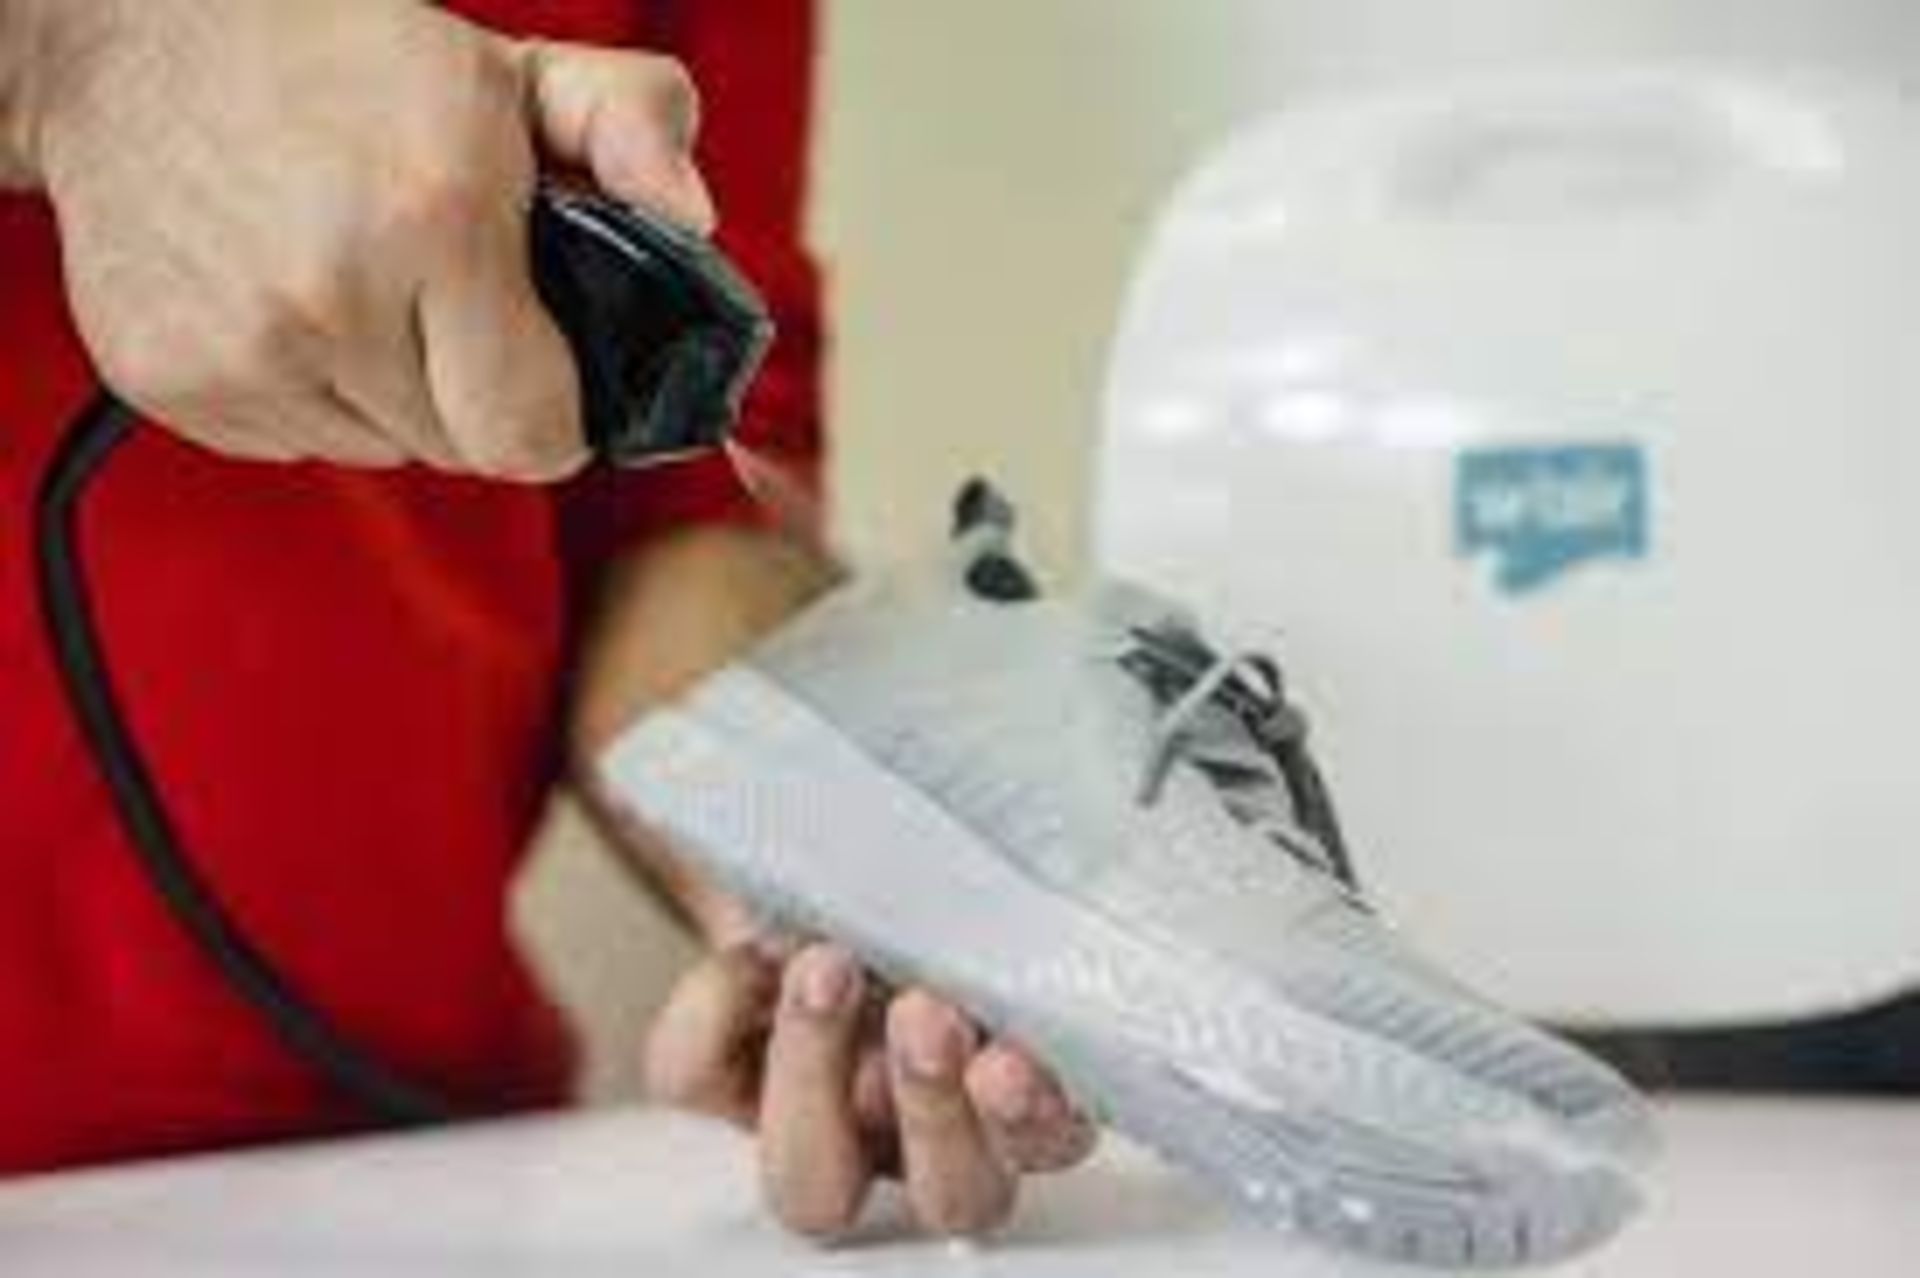 BRAND NEW W'AIR SNEAKER CLEANING SYSTEMS RRP £299, The w'air uses hydrodynamic technology - Image 3 of 6